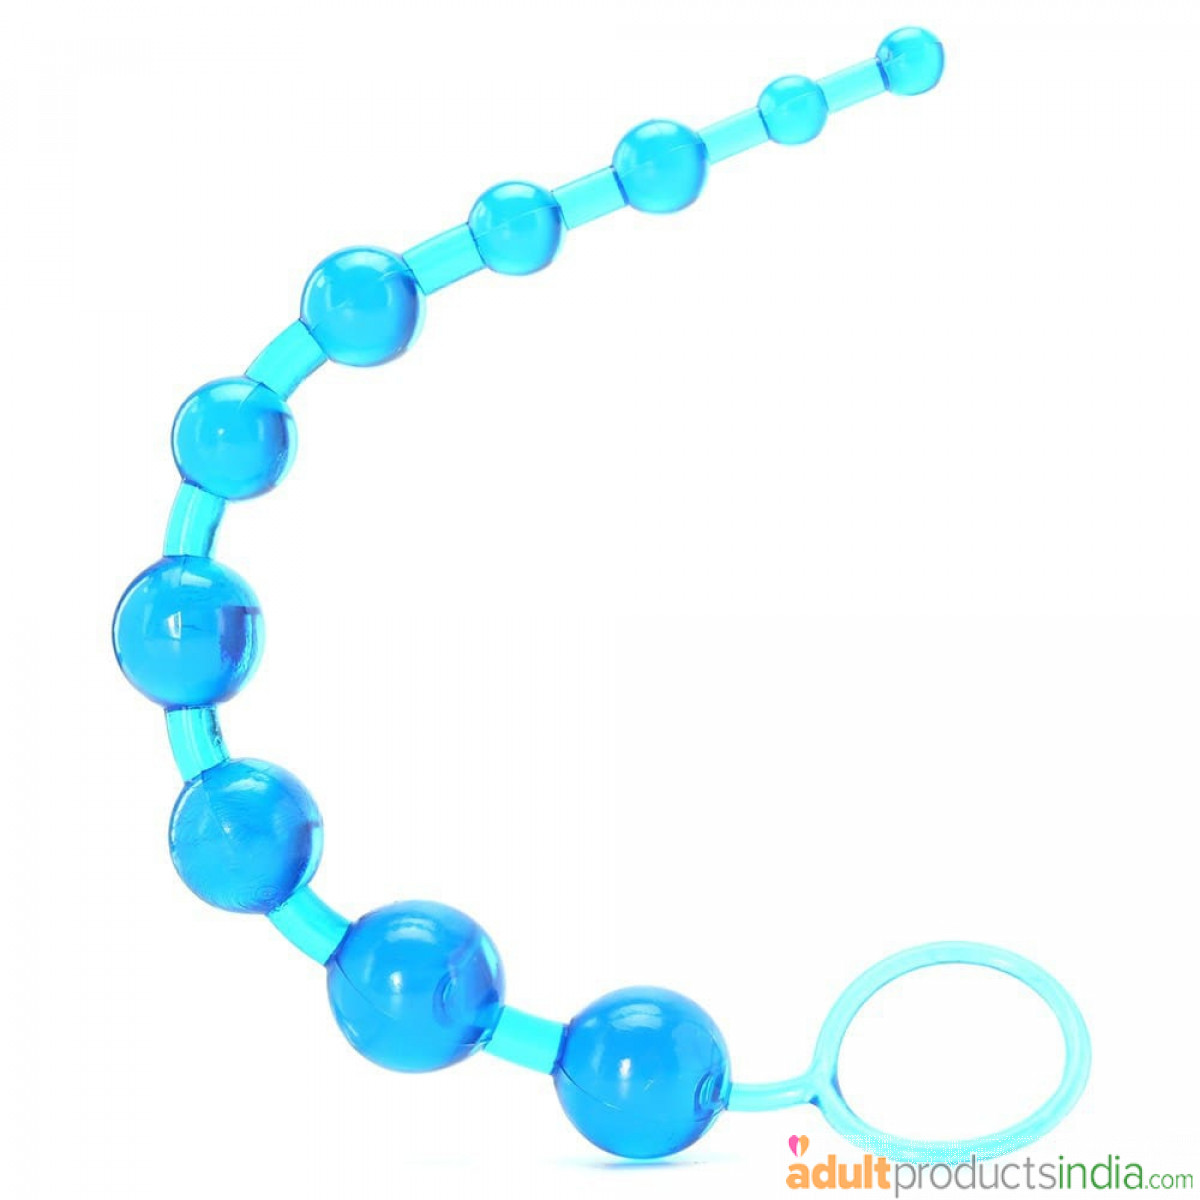 Anal Beads Blue Adult Products India 7279